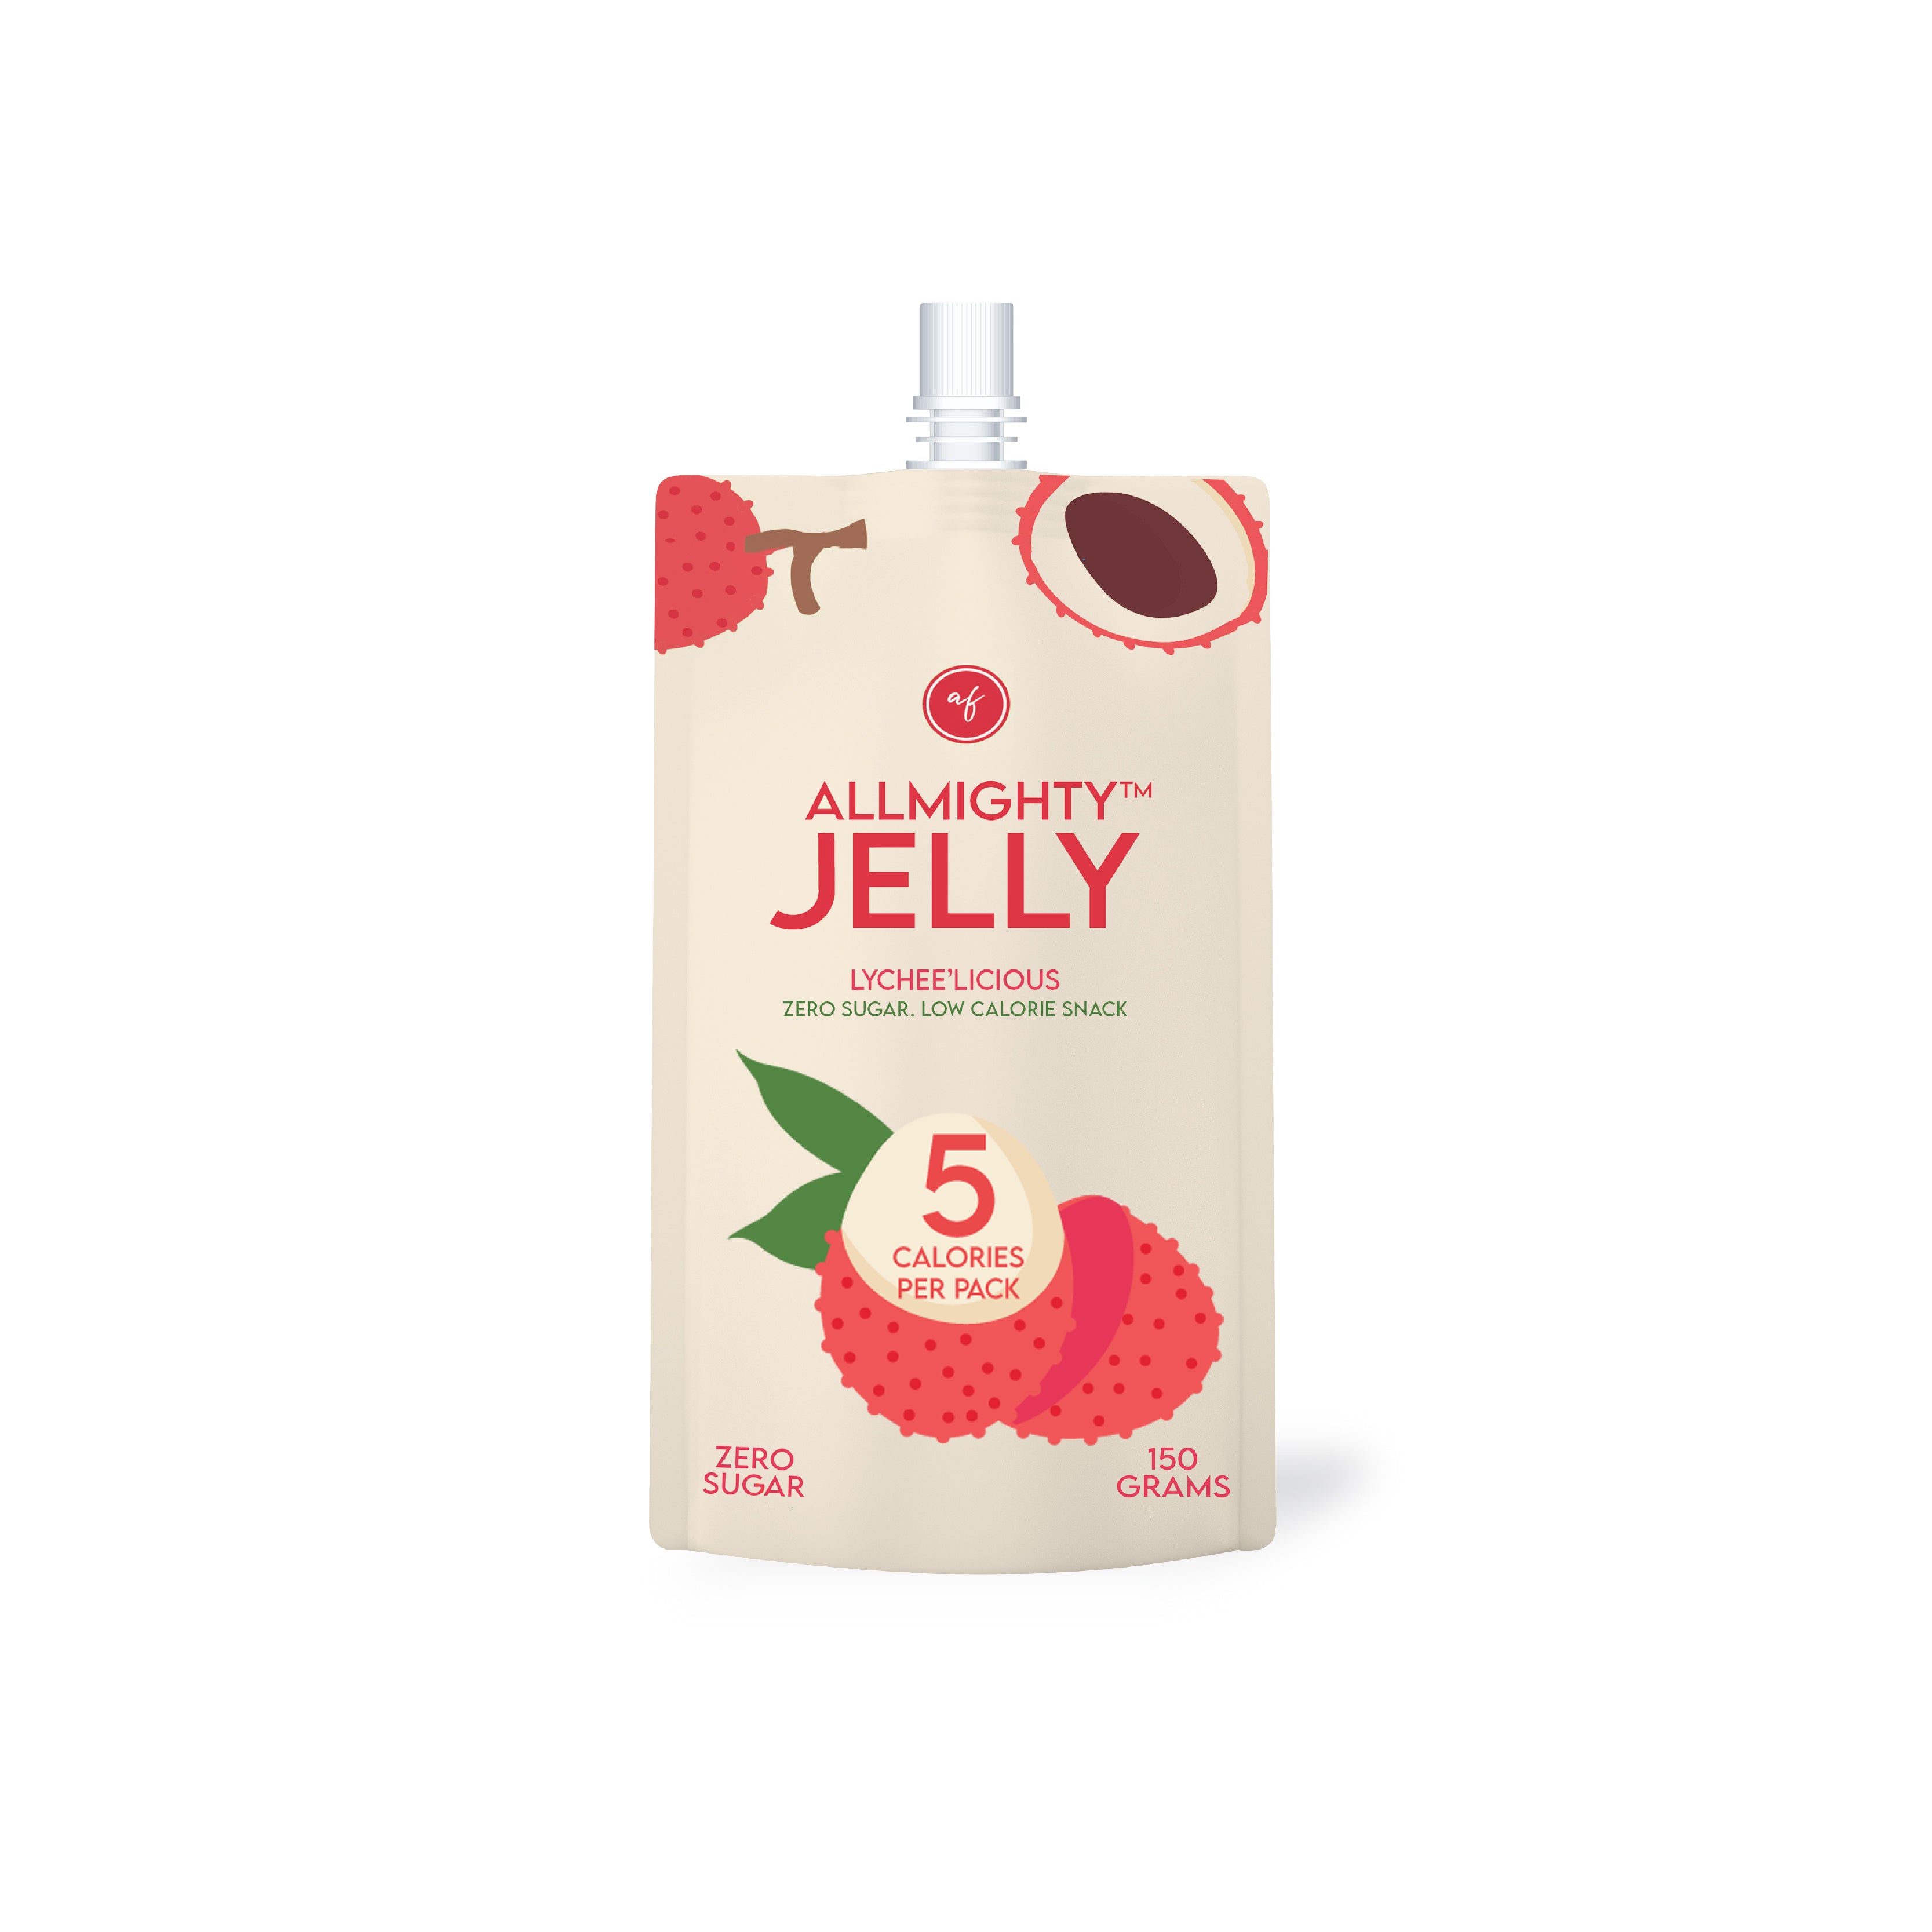 Allmighty Jelly Lychee’licious (10 PACK)